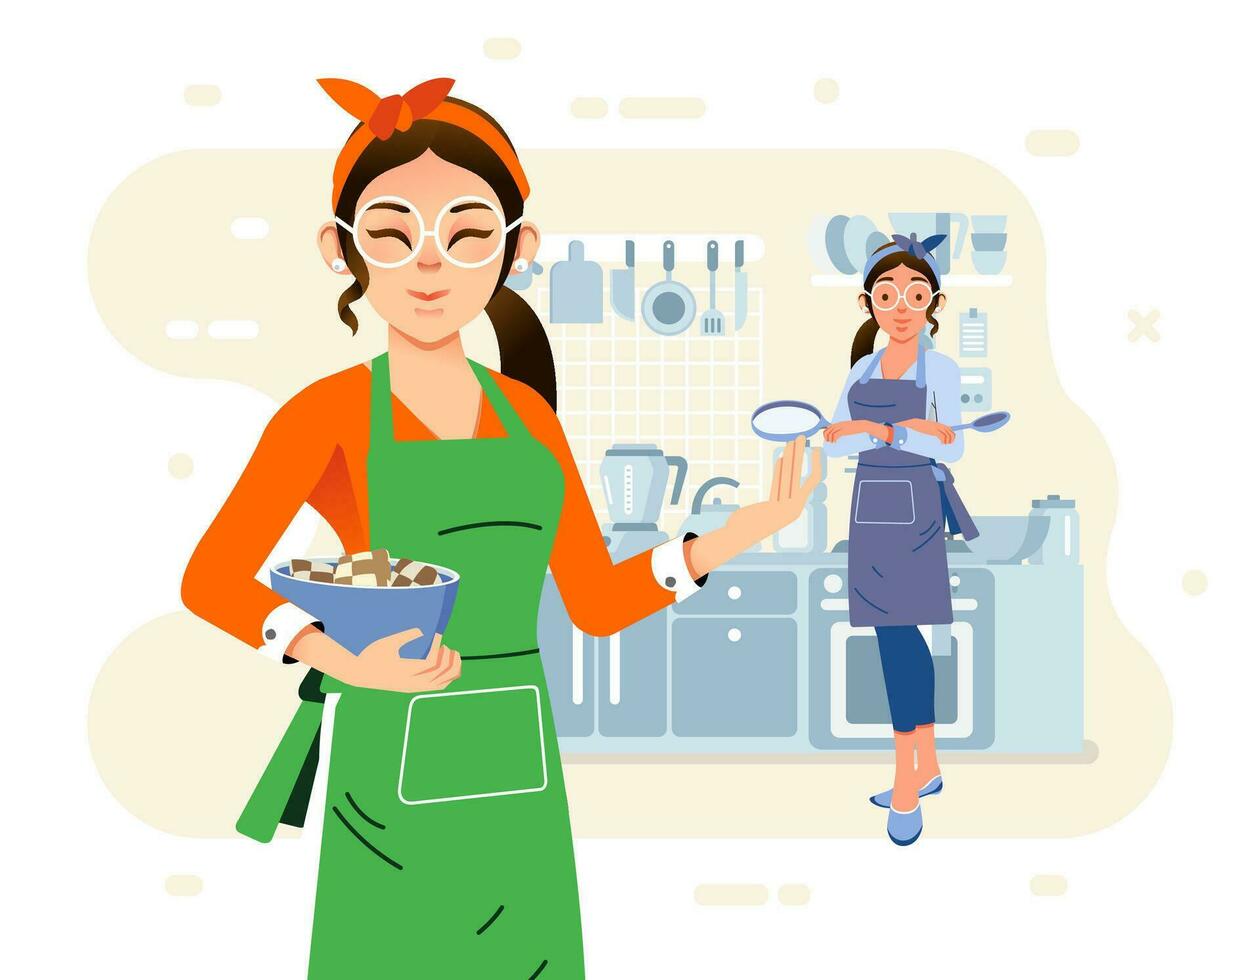 two moms cooking together in the kitchen, wearing apron and kitchen appliance as background vector